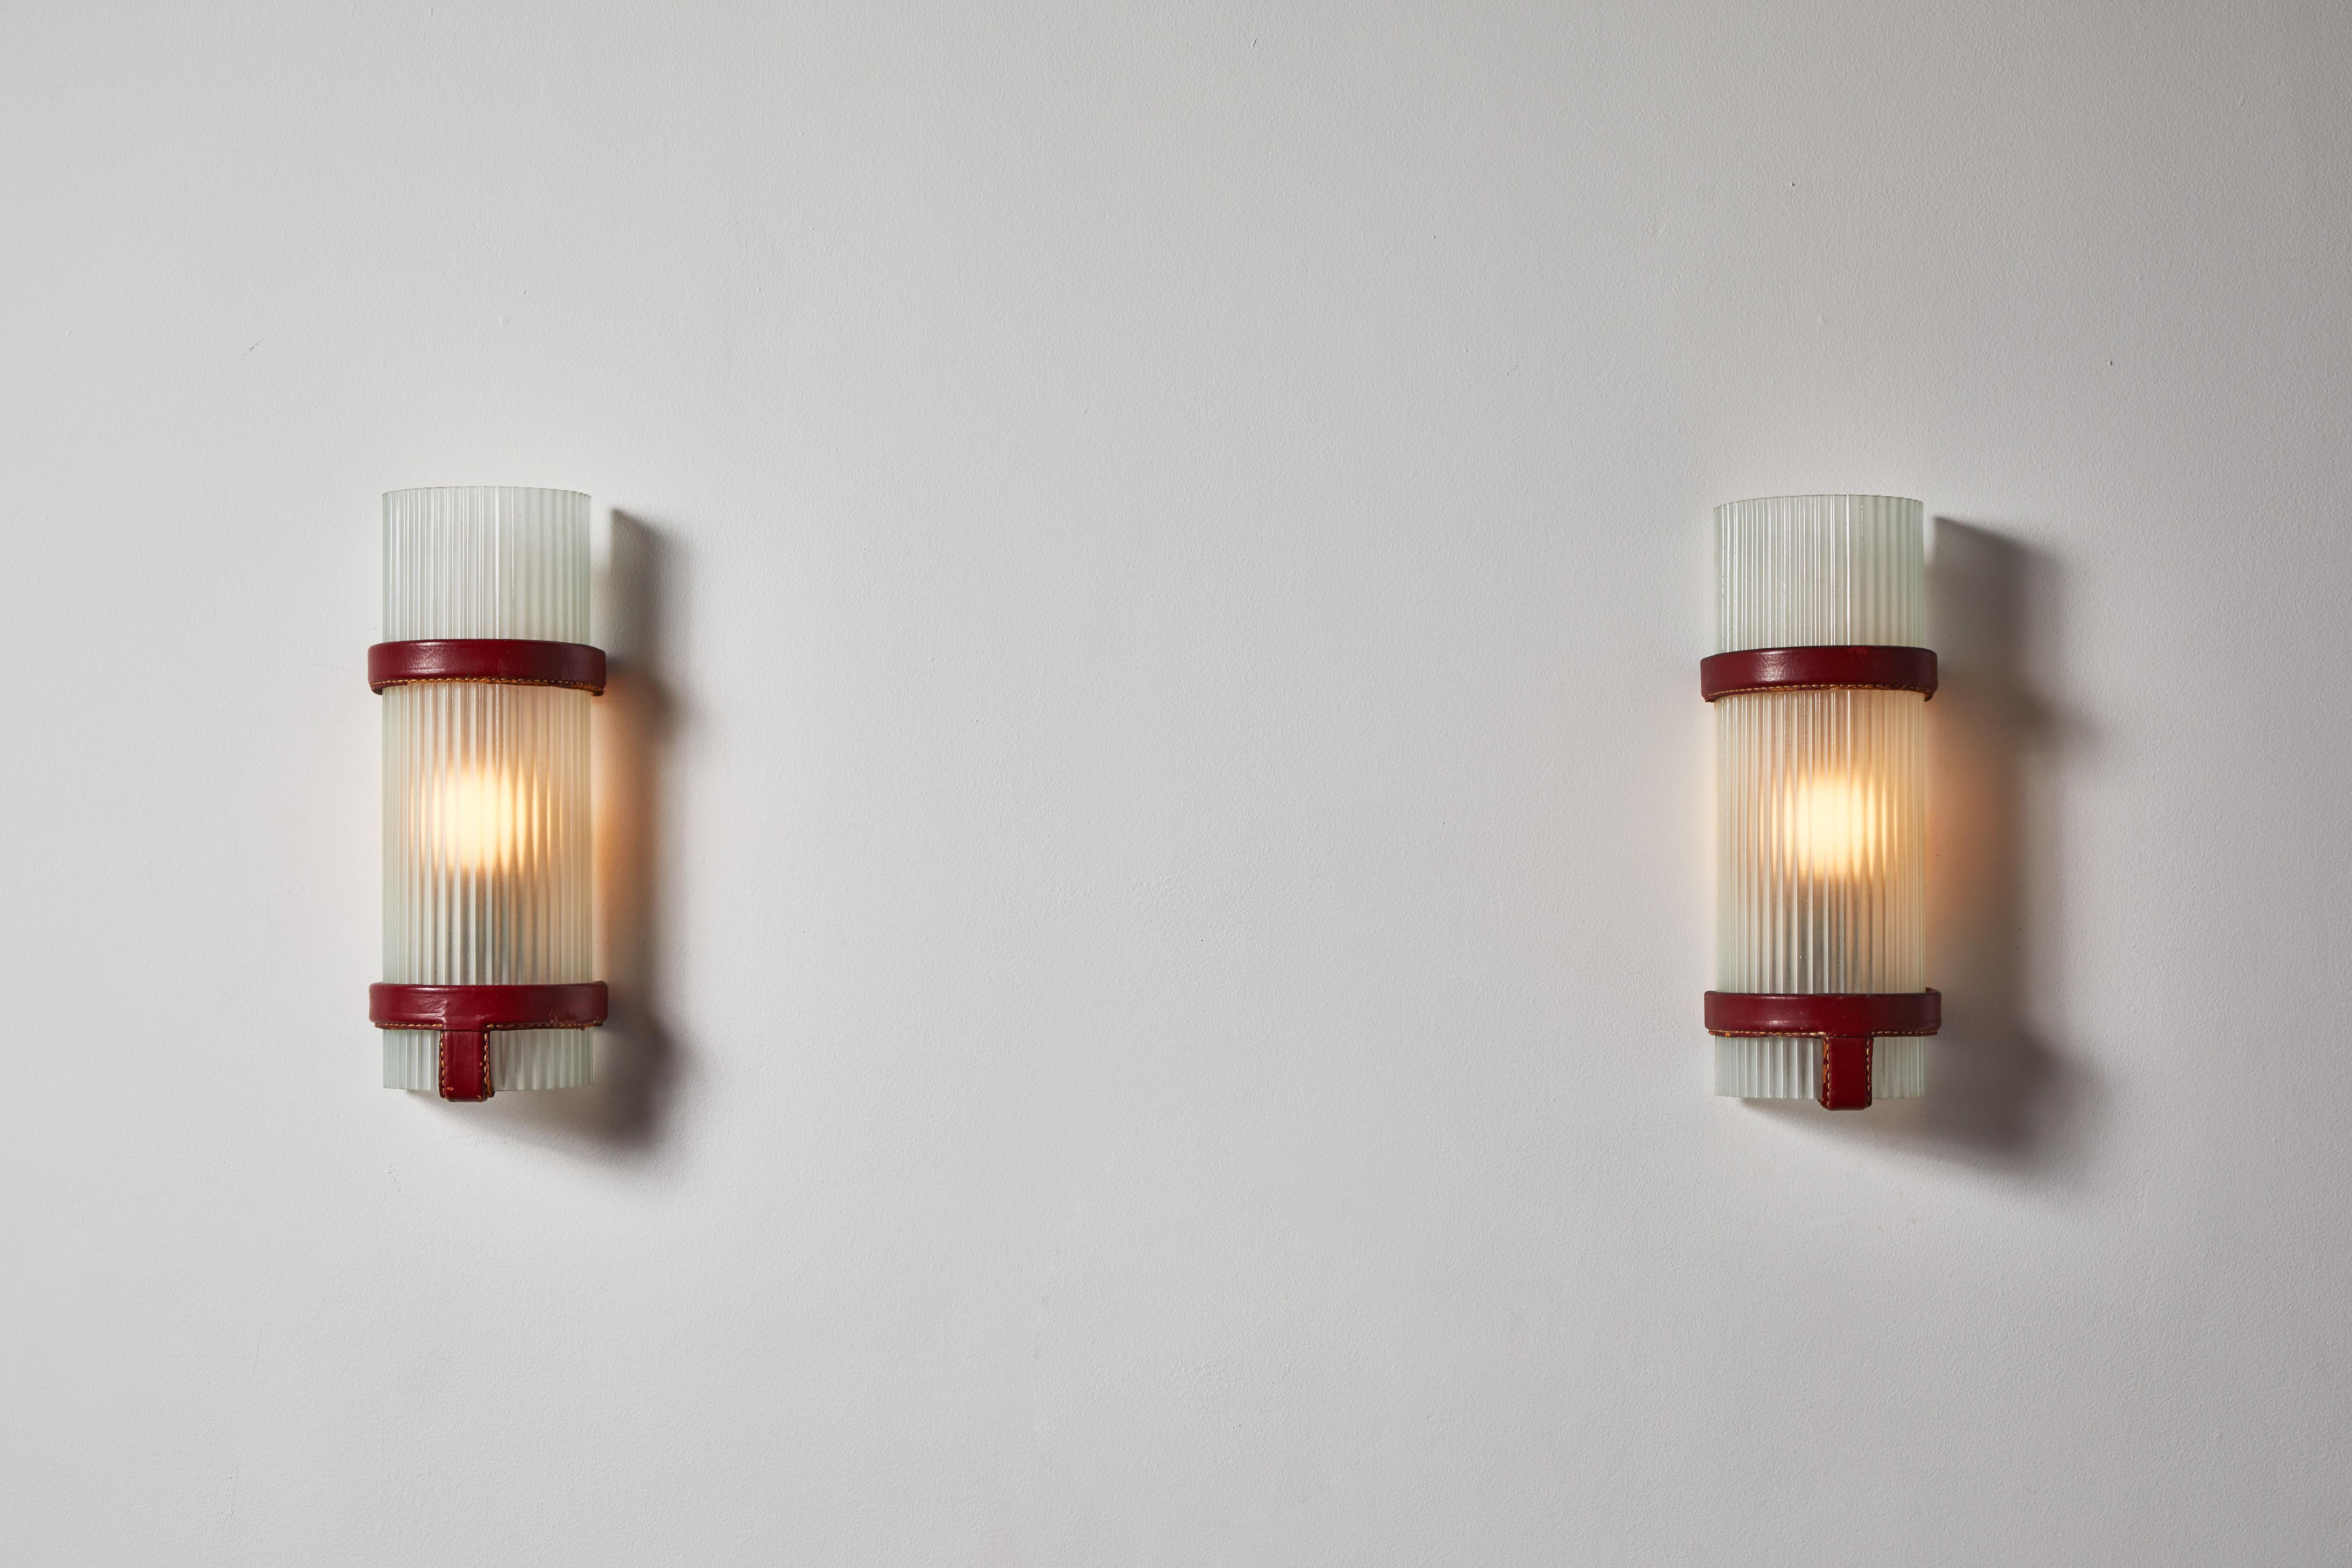 Pair of sconces by Jacques Adnet. Designed and manufactured in France, circa 1950s. Glass, with stitched leather. Rewired for U.S. junction boxes. Each light takes one E27 100w maximum bulb. Bulbs provided as a one time courtesy.